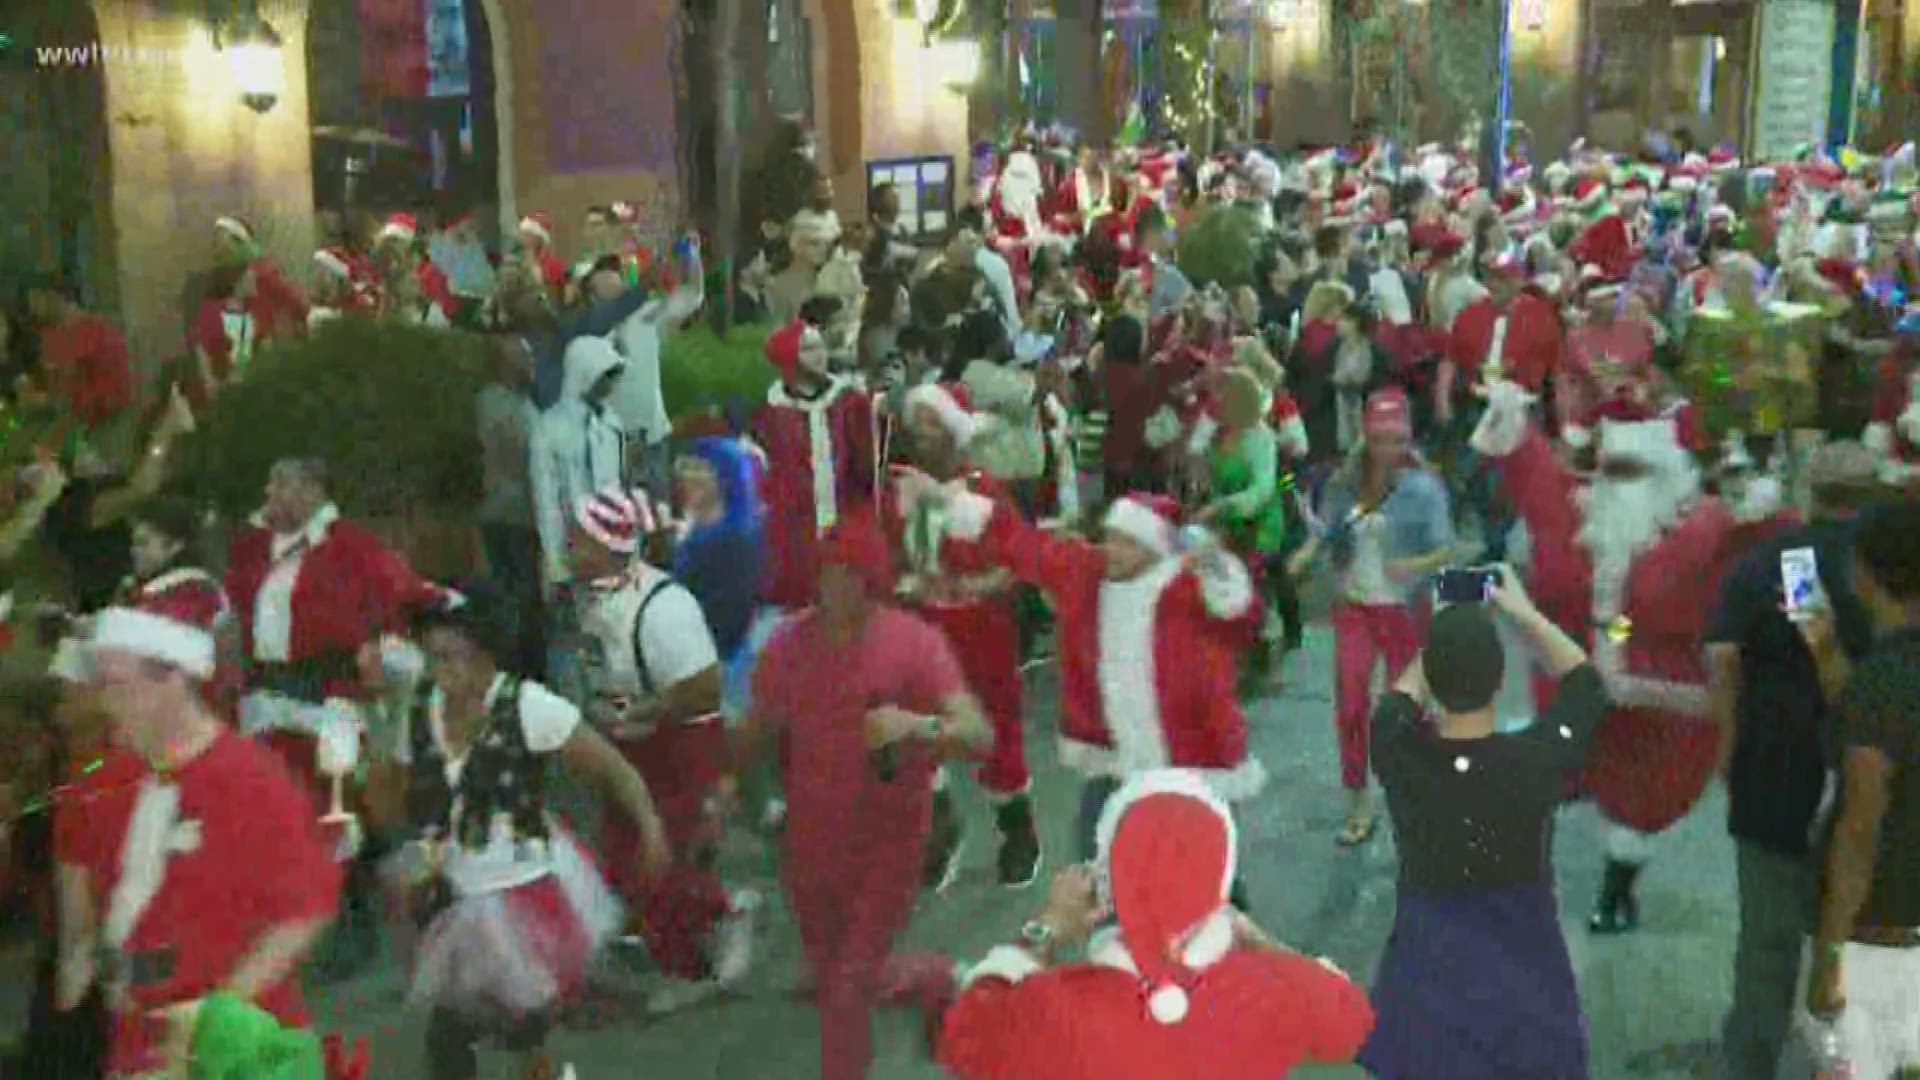 Grab your red suit and reindeer and join the  Mayor of the North Pole Bob Dauterive at the 9th Annual Running of the Santas.